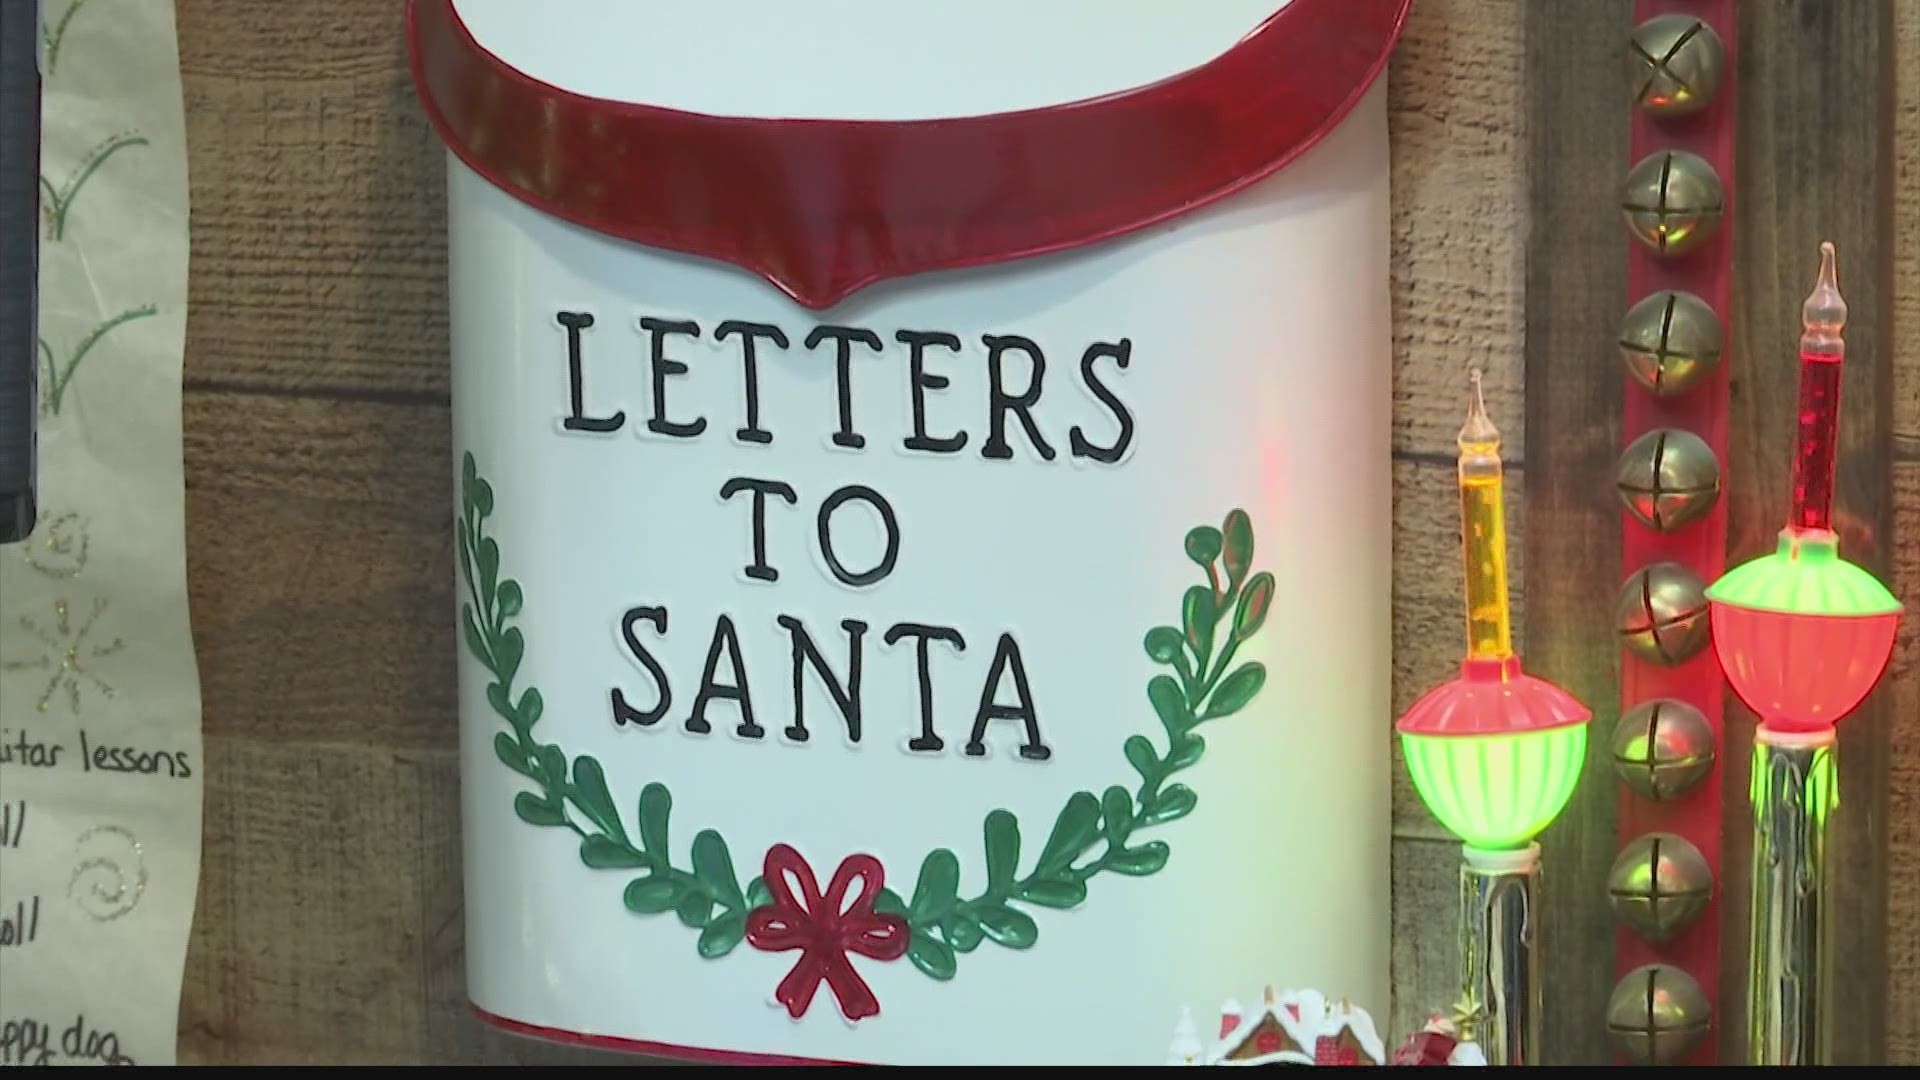 One Huntsville man has created a safe and fun way for families, and companies to still see Santa.